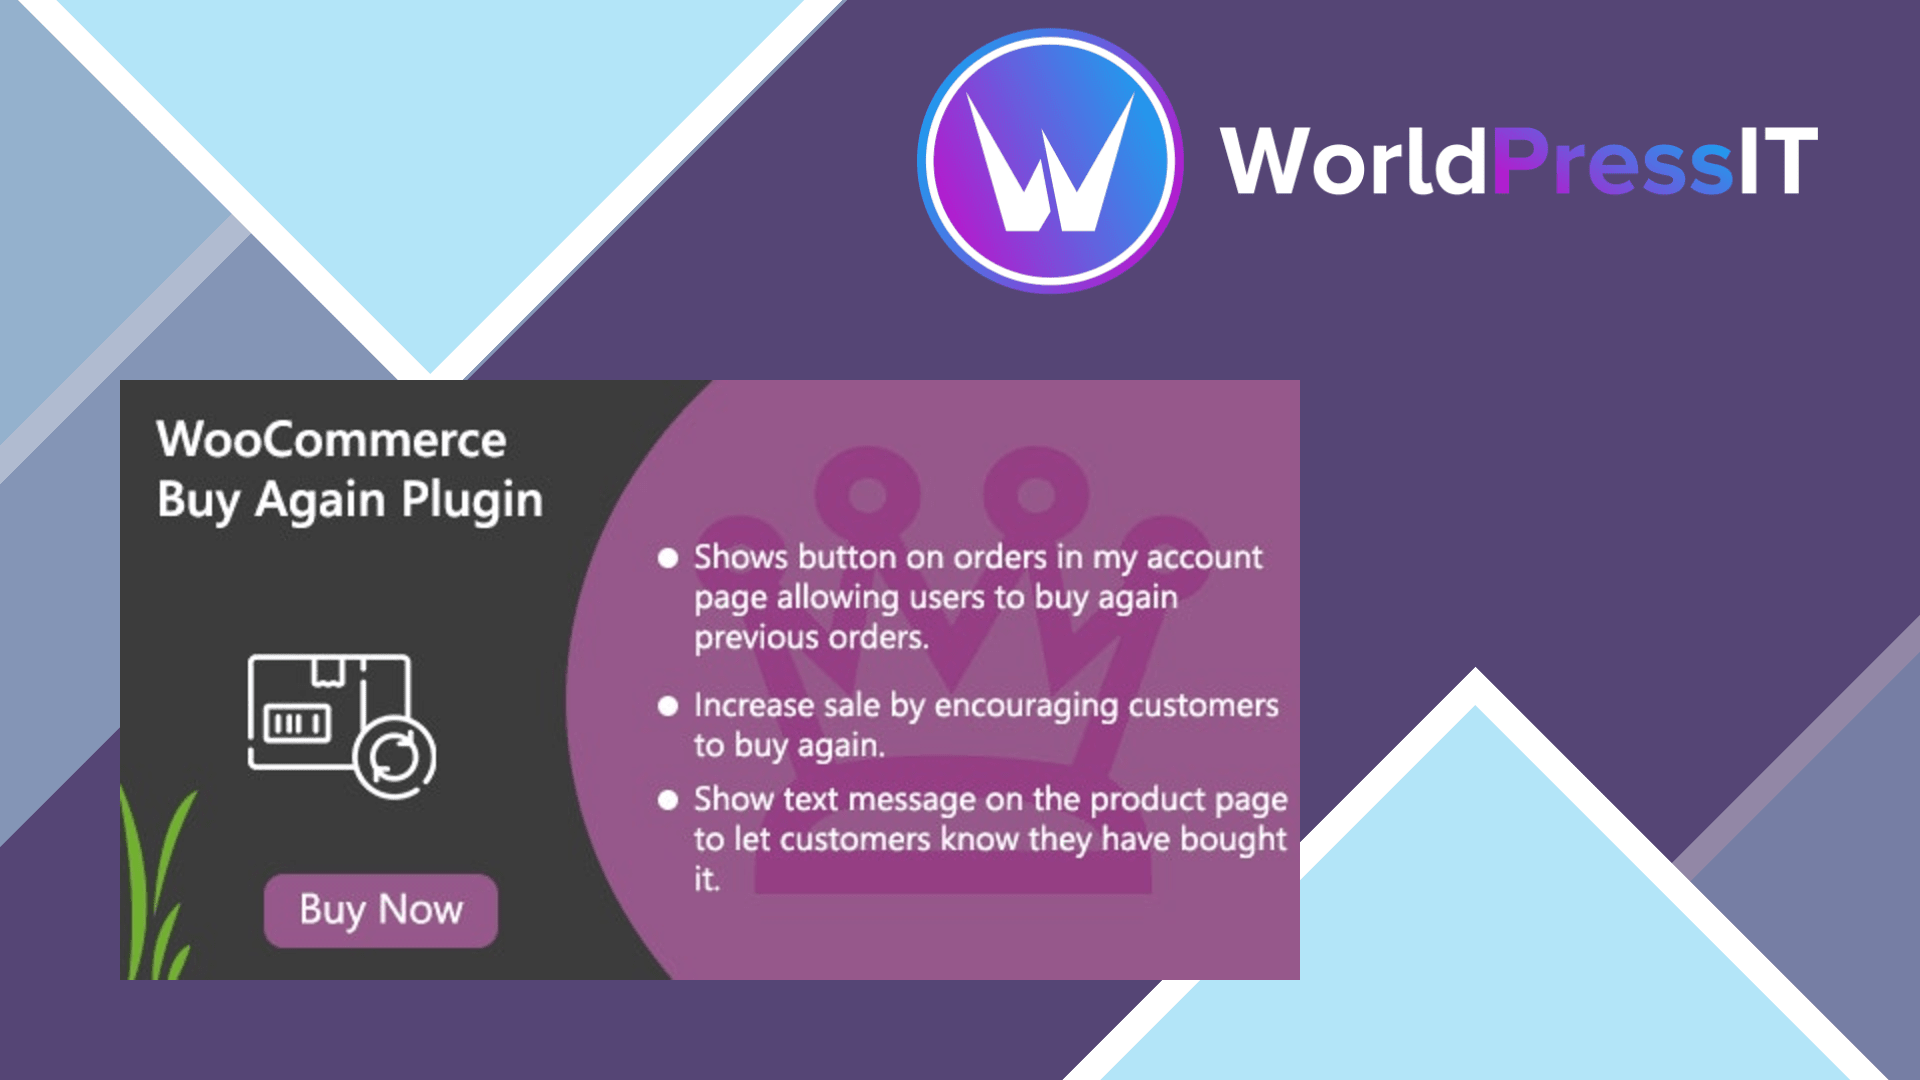 WooCommerce: Order Again Button @ My Account > Orders